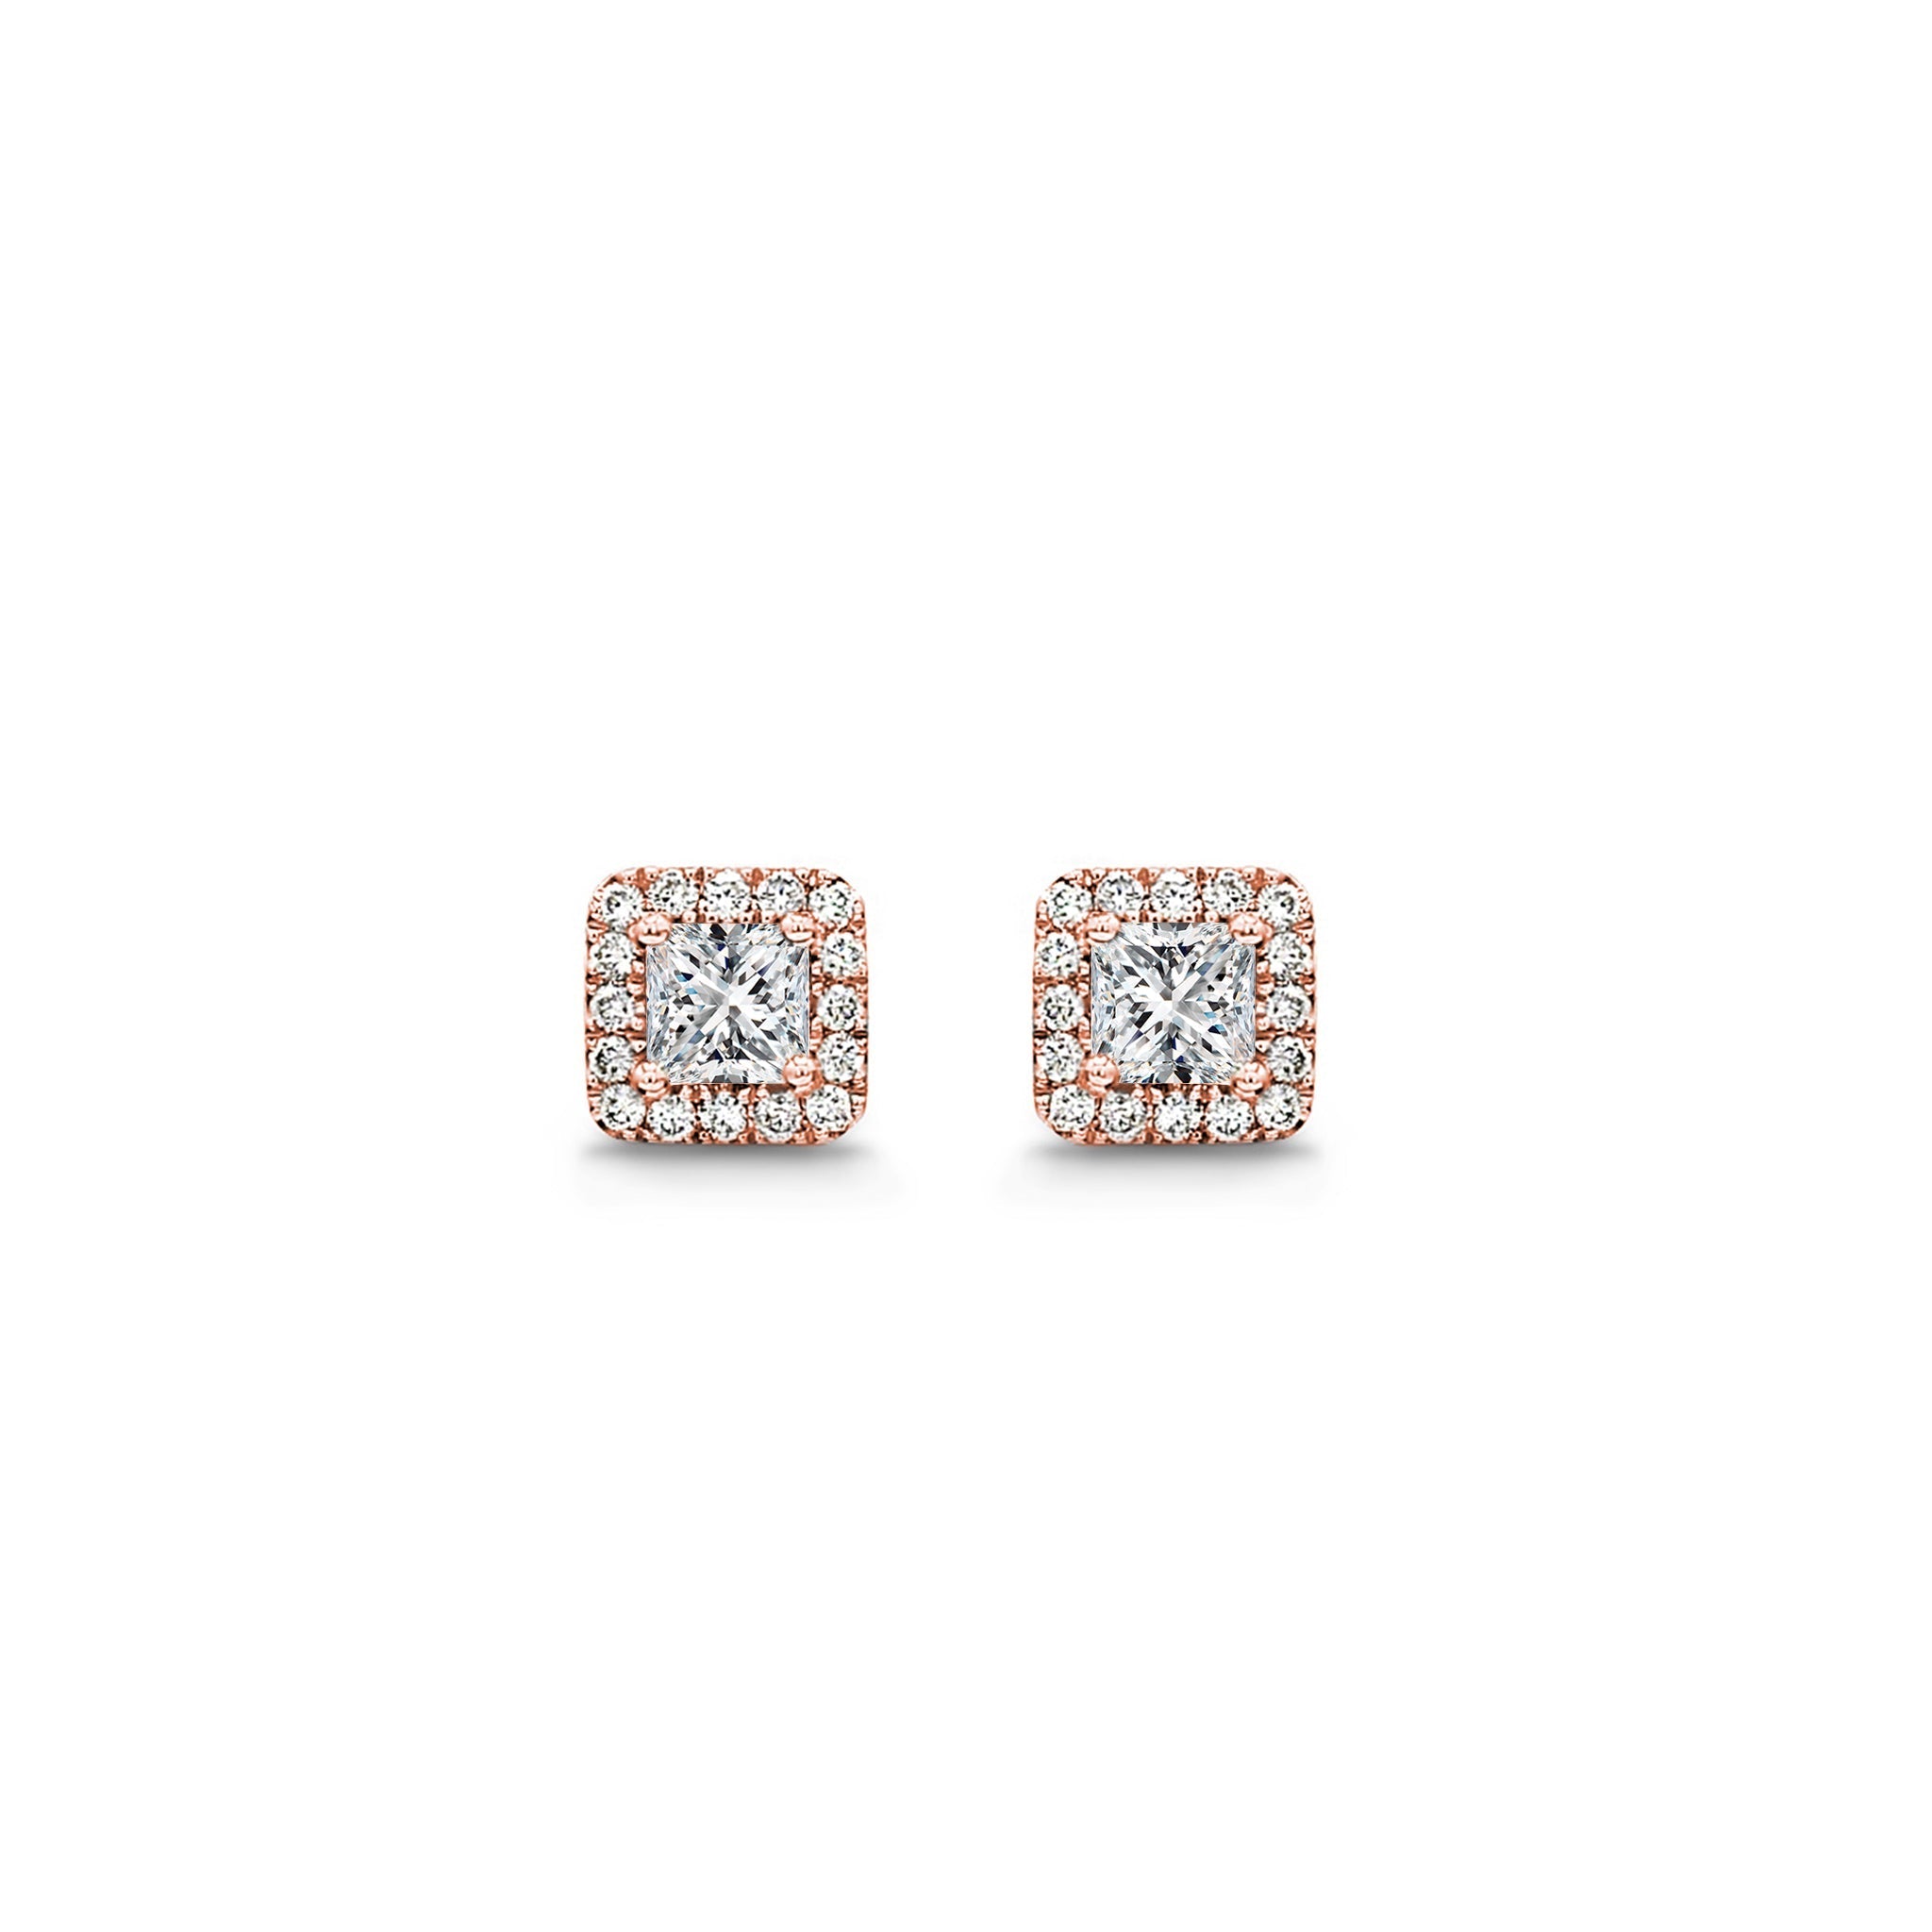 Shimansky - My Girl Diamond Halo Earrings 0.40 Carat Crafted in 18K Rose Gold Front View